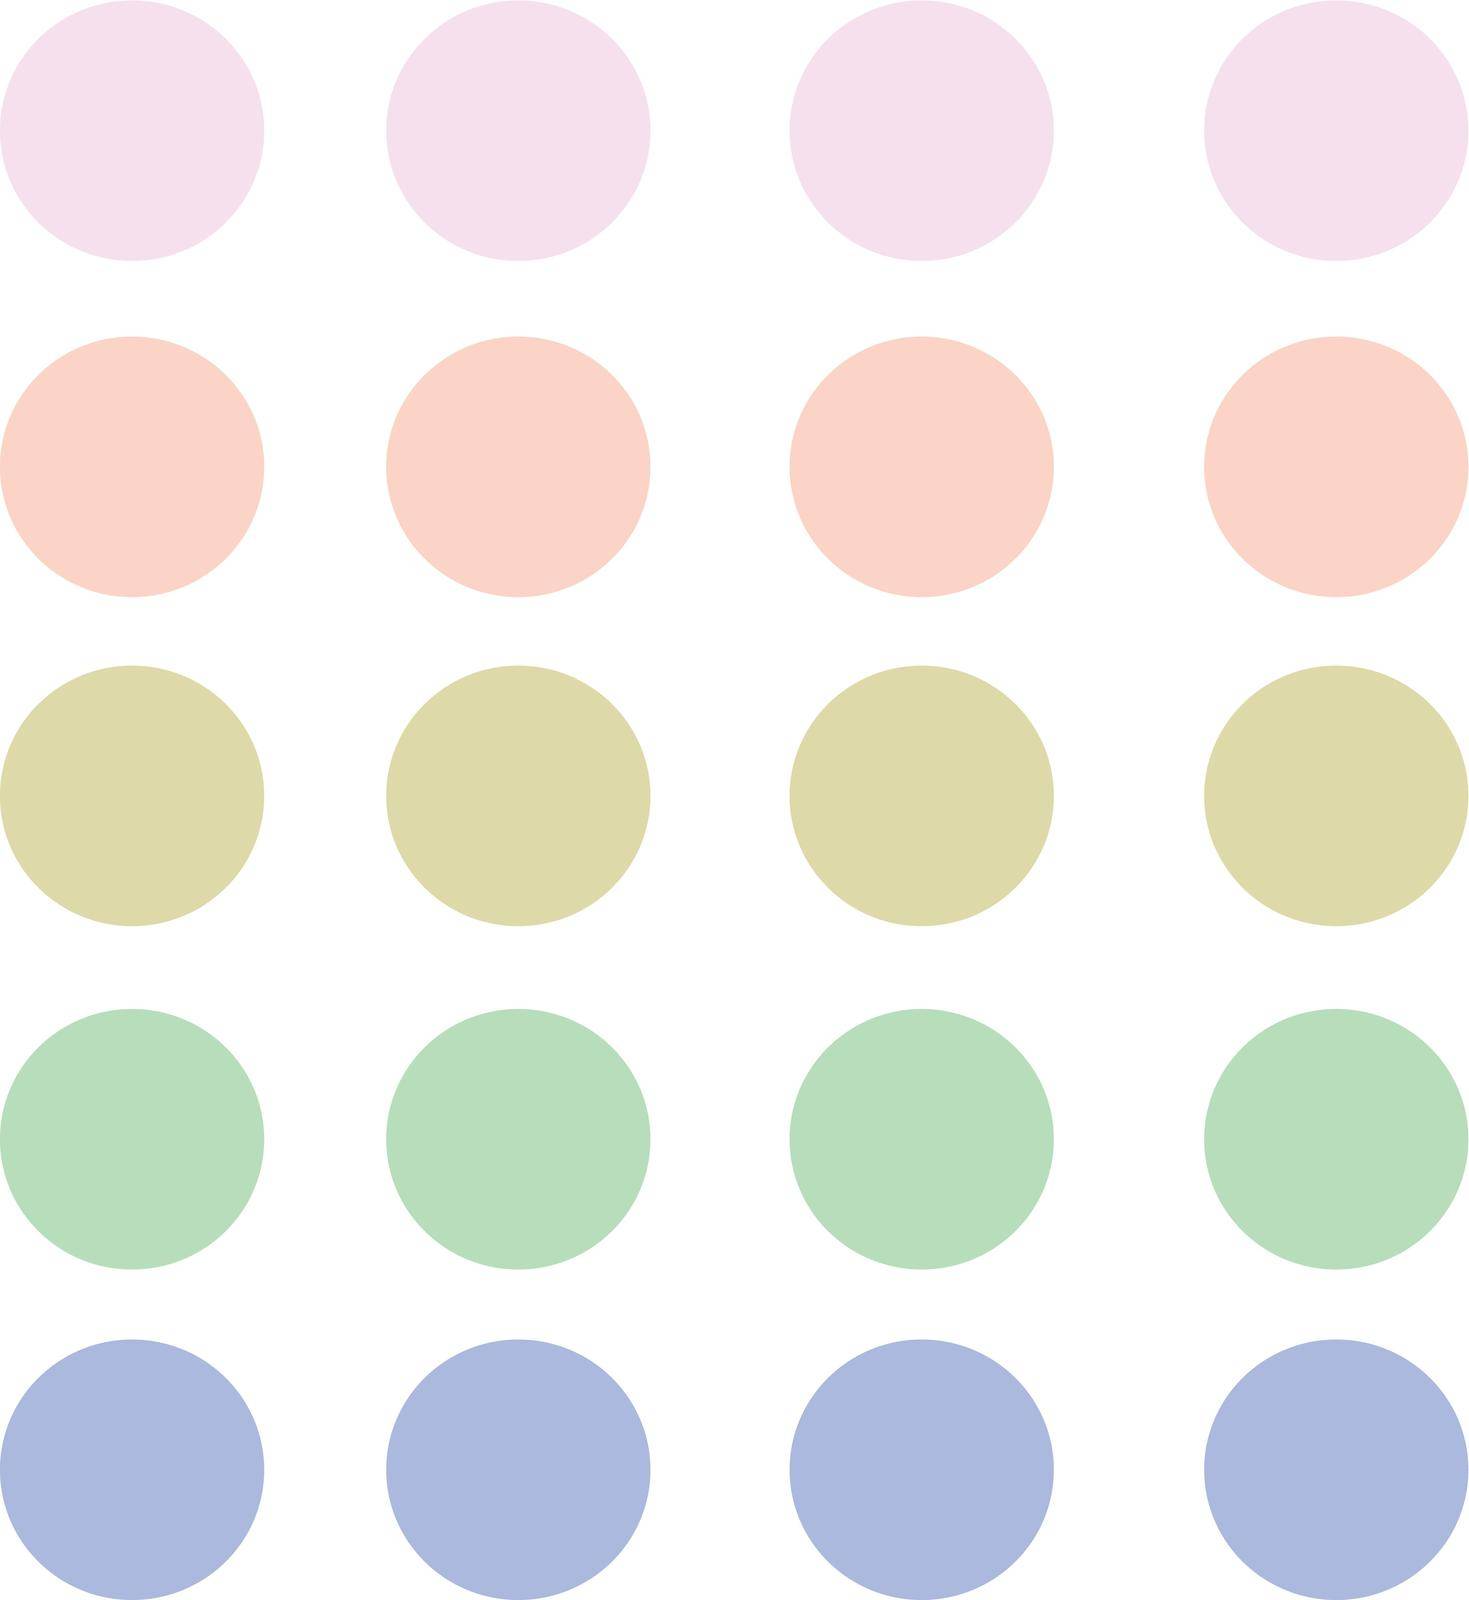 vector set of simple multicolored round elements for a daily planner